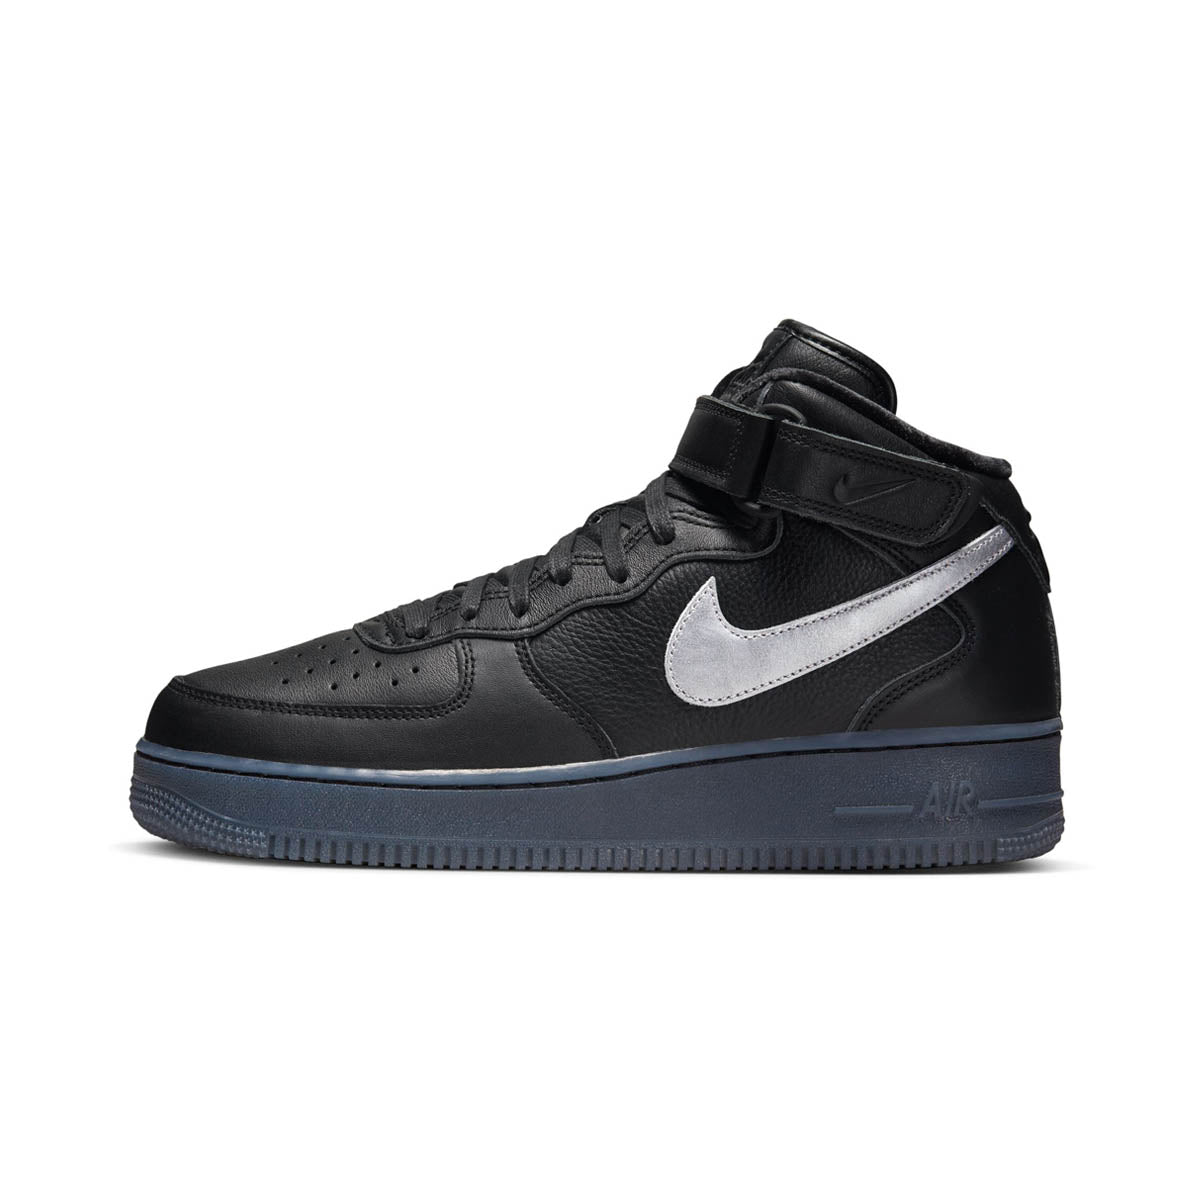 Buy Nike Air Force 1 Mid 07 LV8 Men's Casual Shoes Air Force 1 Mid